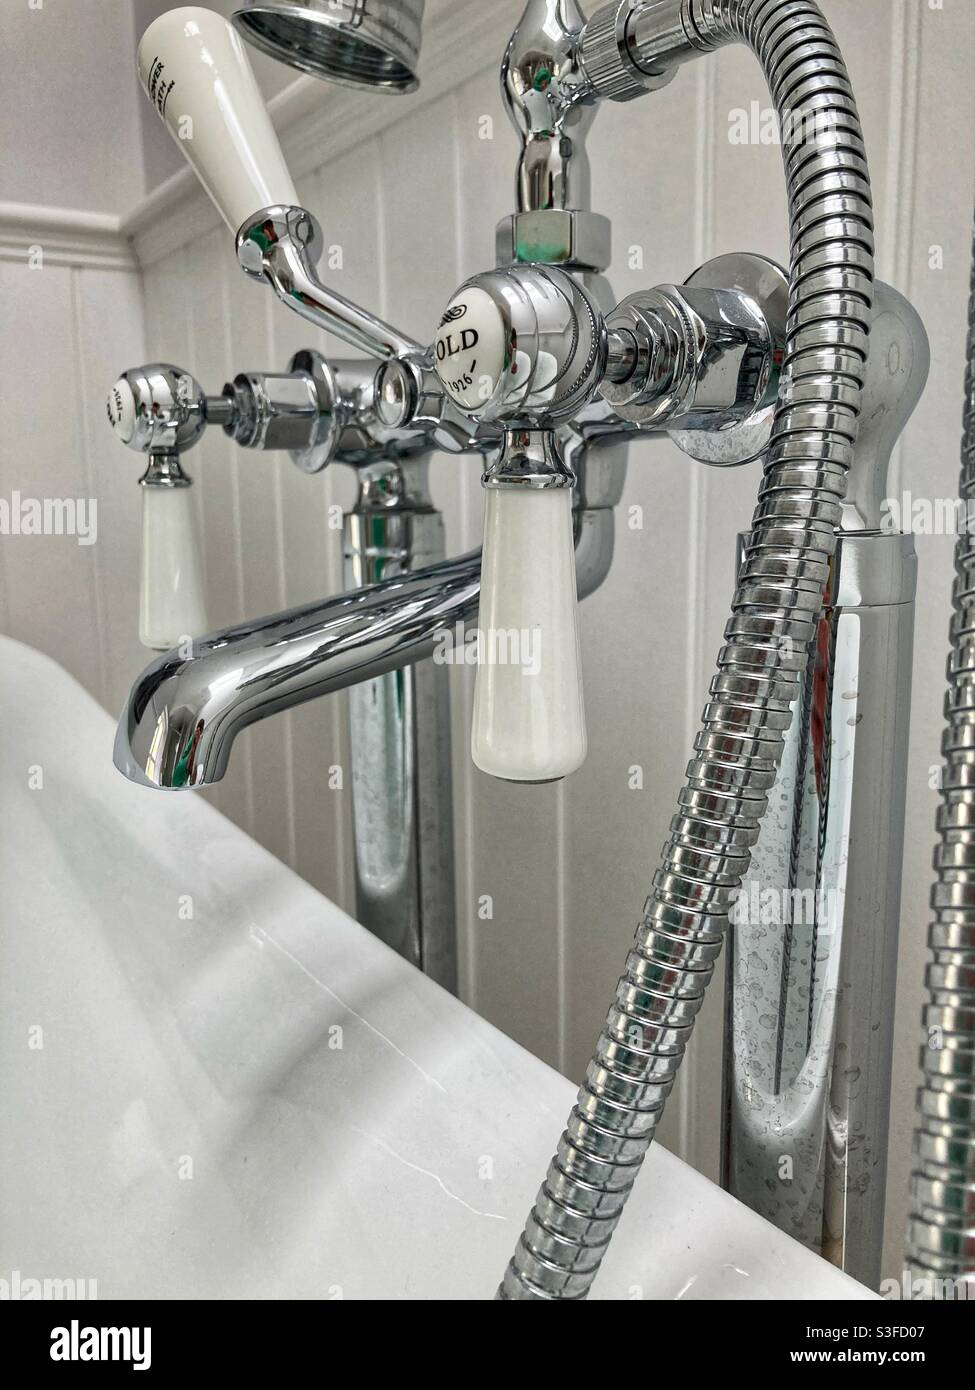 Bath taps / bathroom taps / hot tap / cold tap / basin / water supply Stock  Photo - Alamy